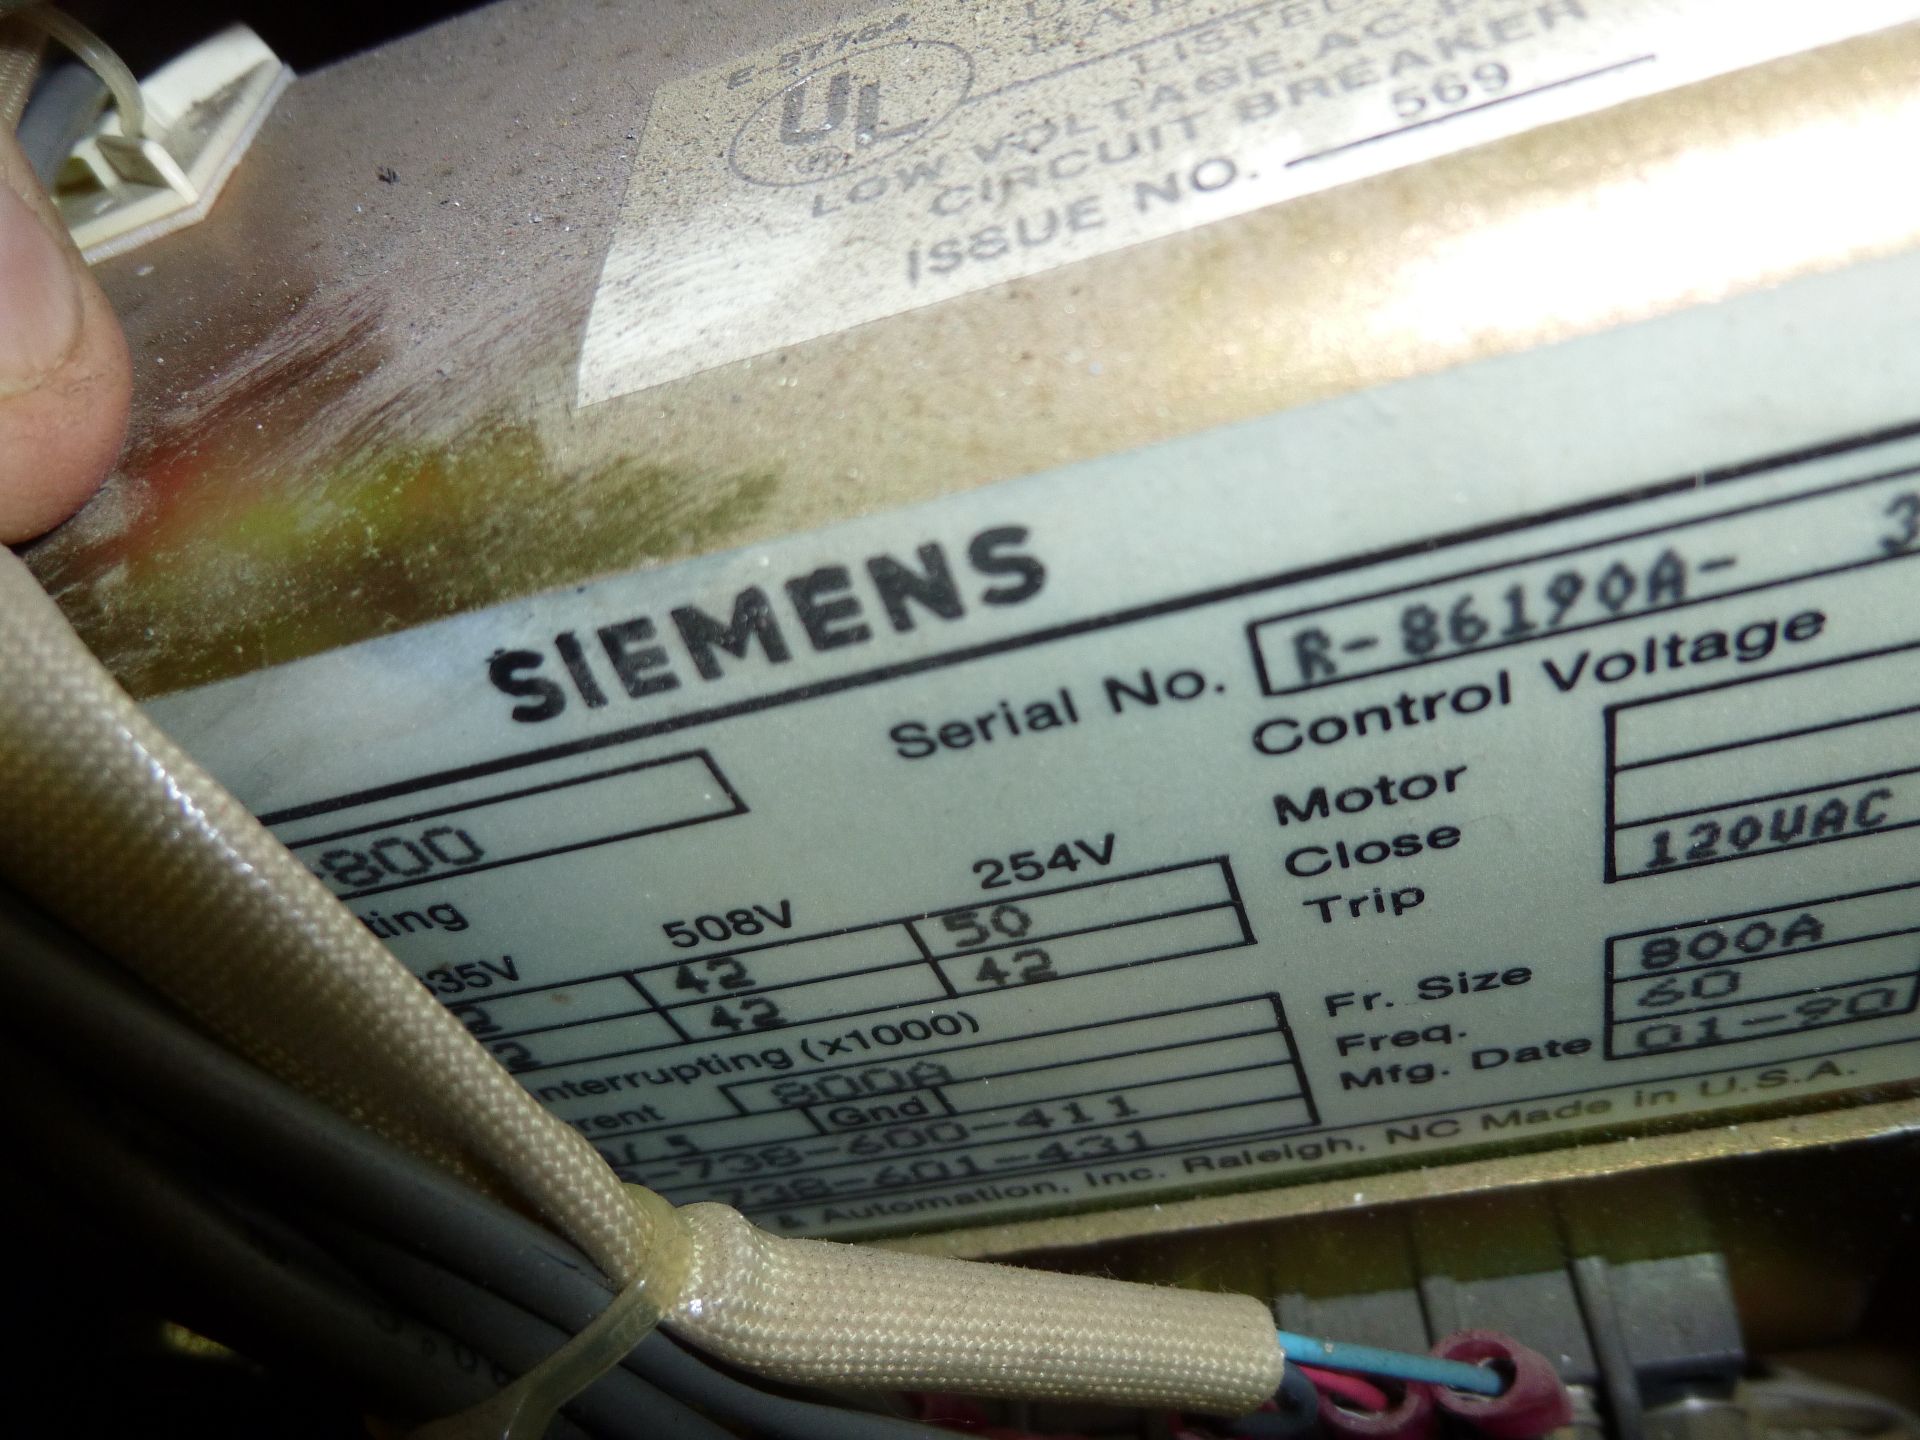 Siemens RLX-800 circuit breaker, 635v max, 800amp frame size with static trip III monitor - Image 2 of 4